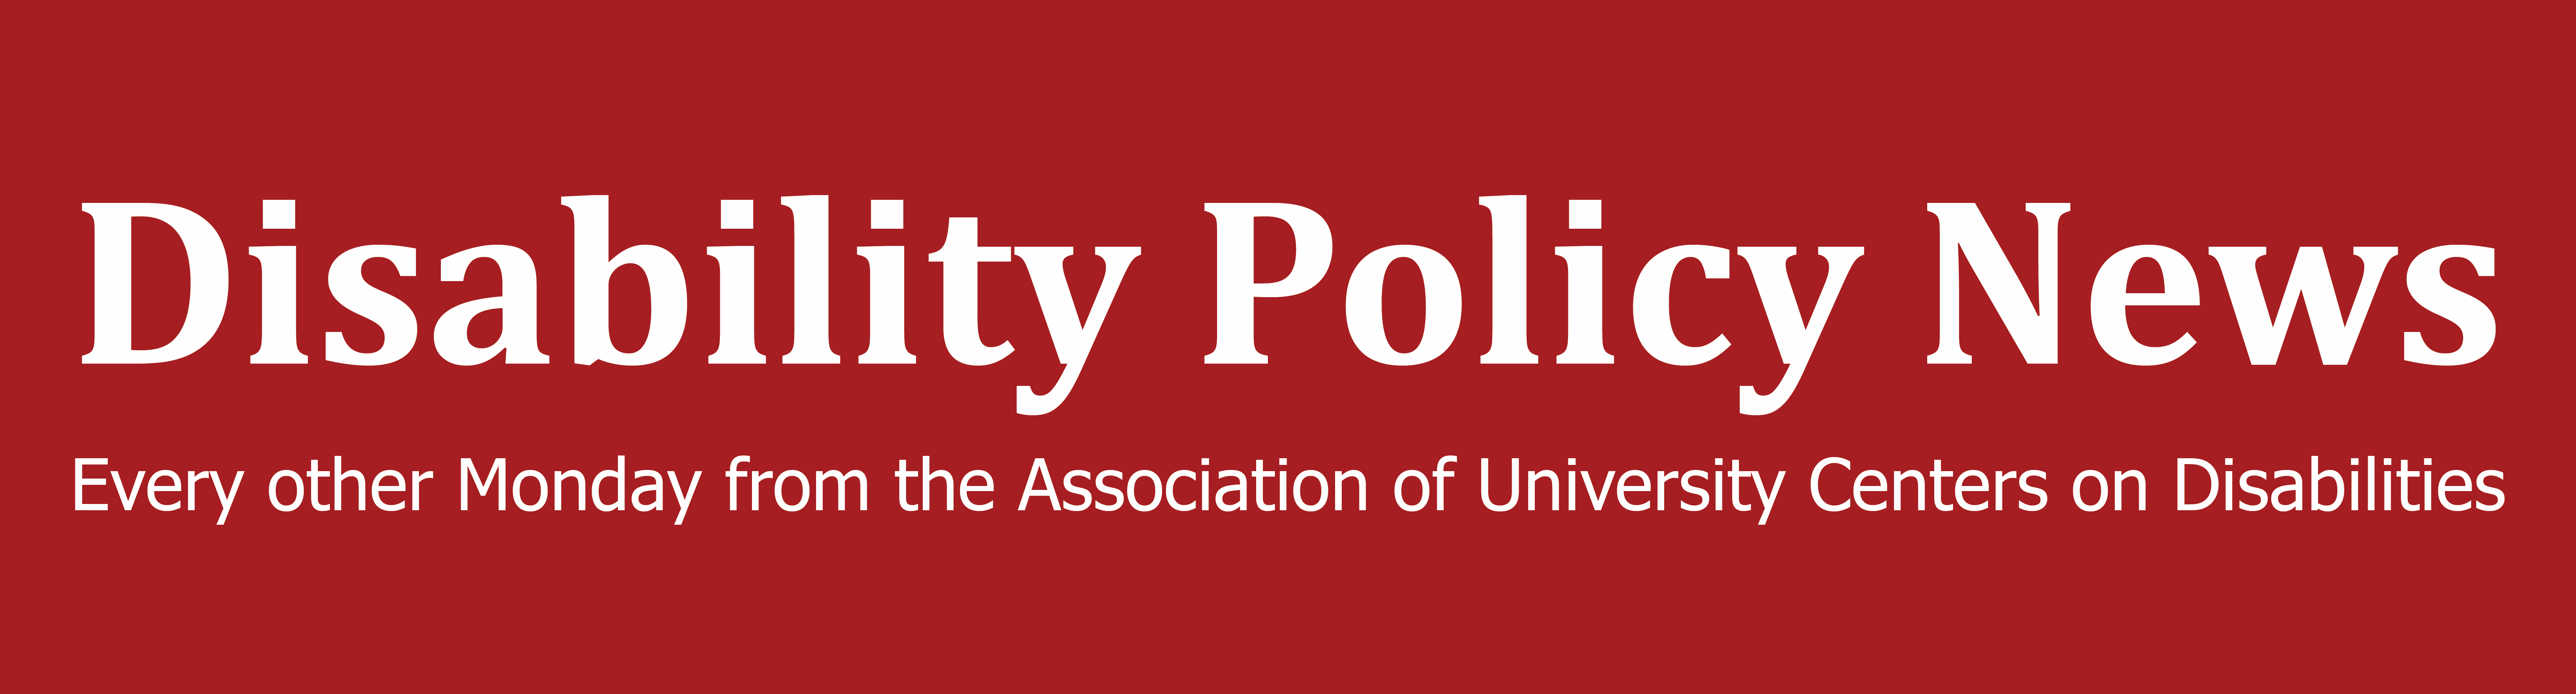 Disability Policy News logo, every Monday, from the Association of University Centers on Disabilities (AUCD)